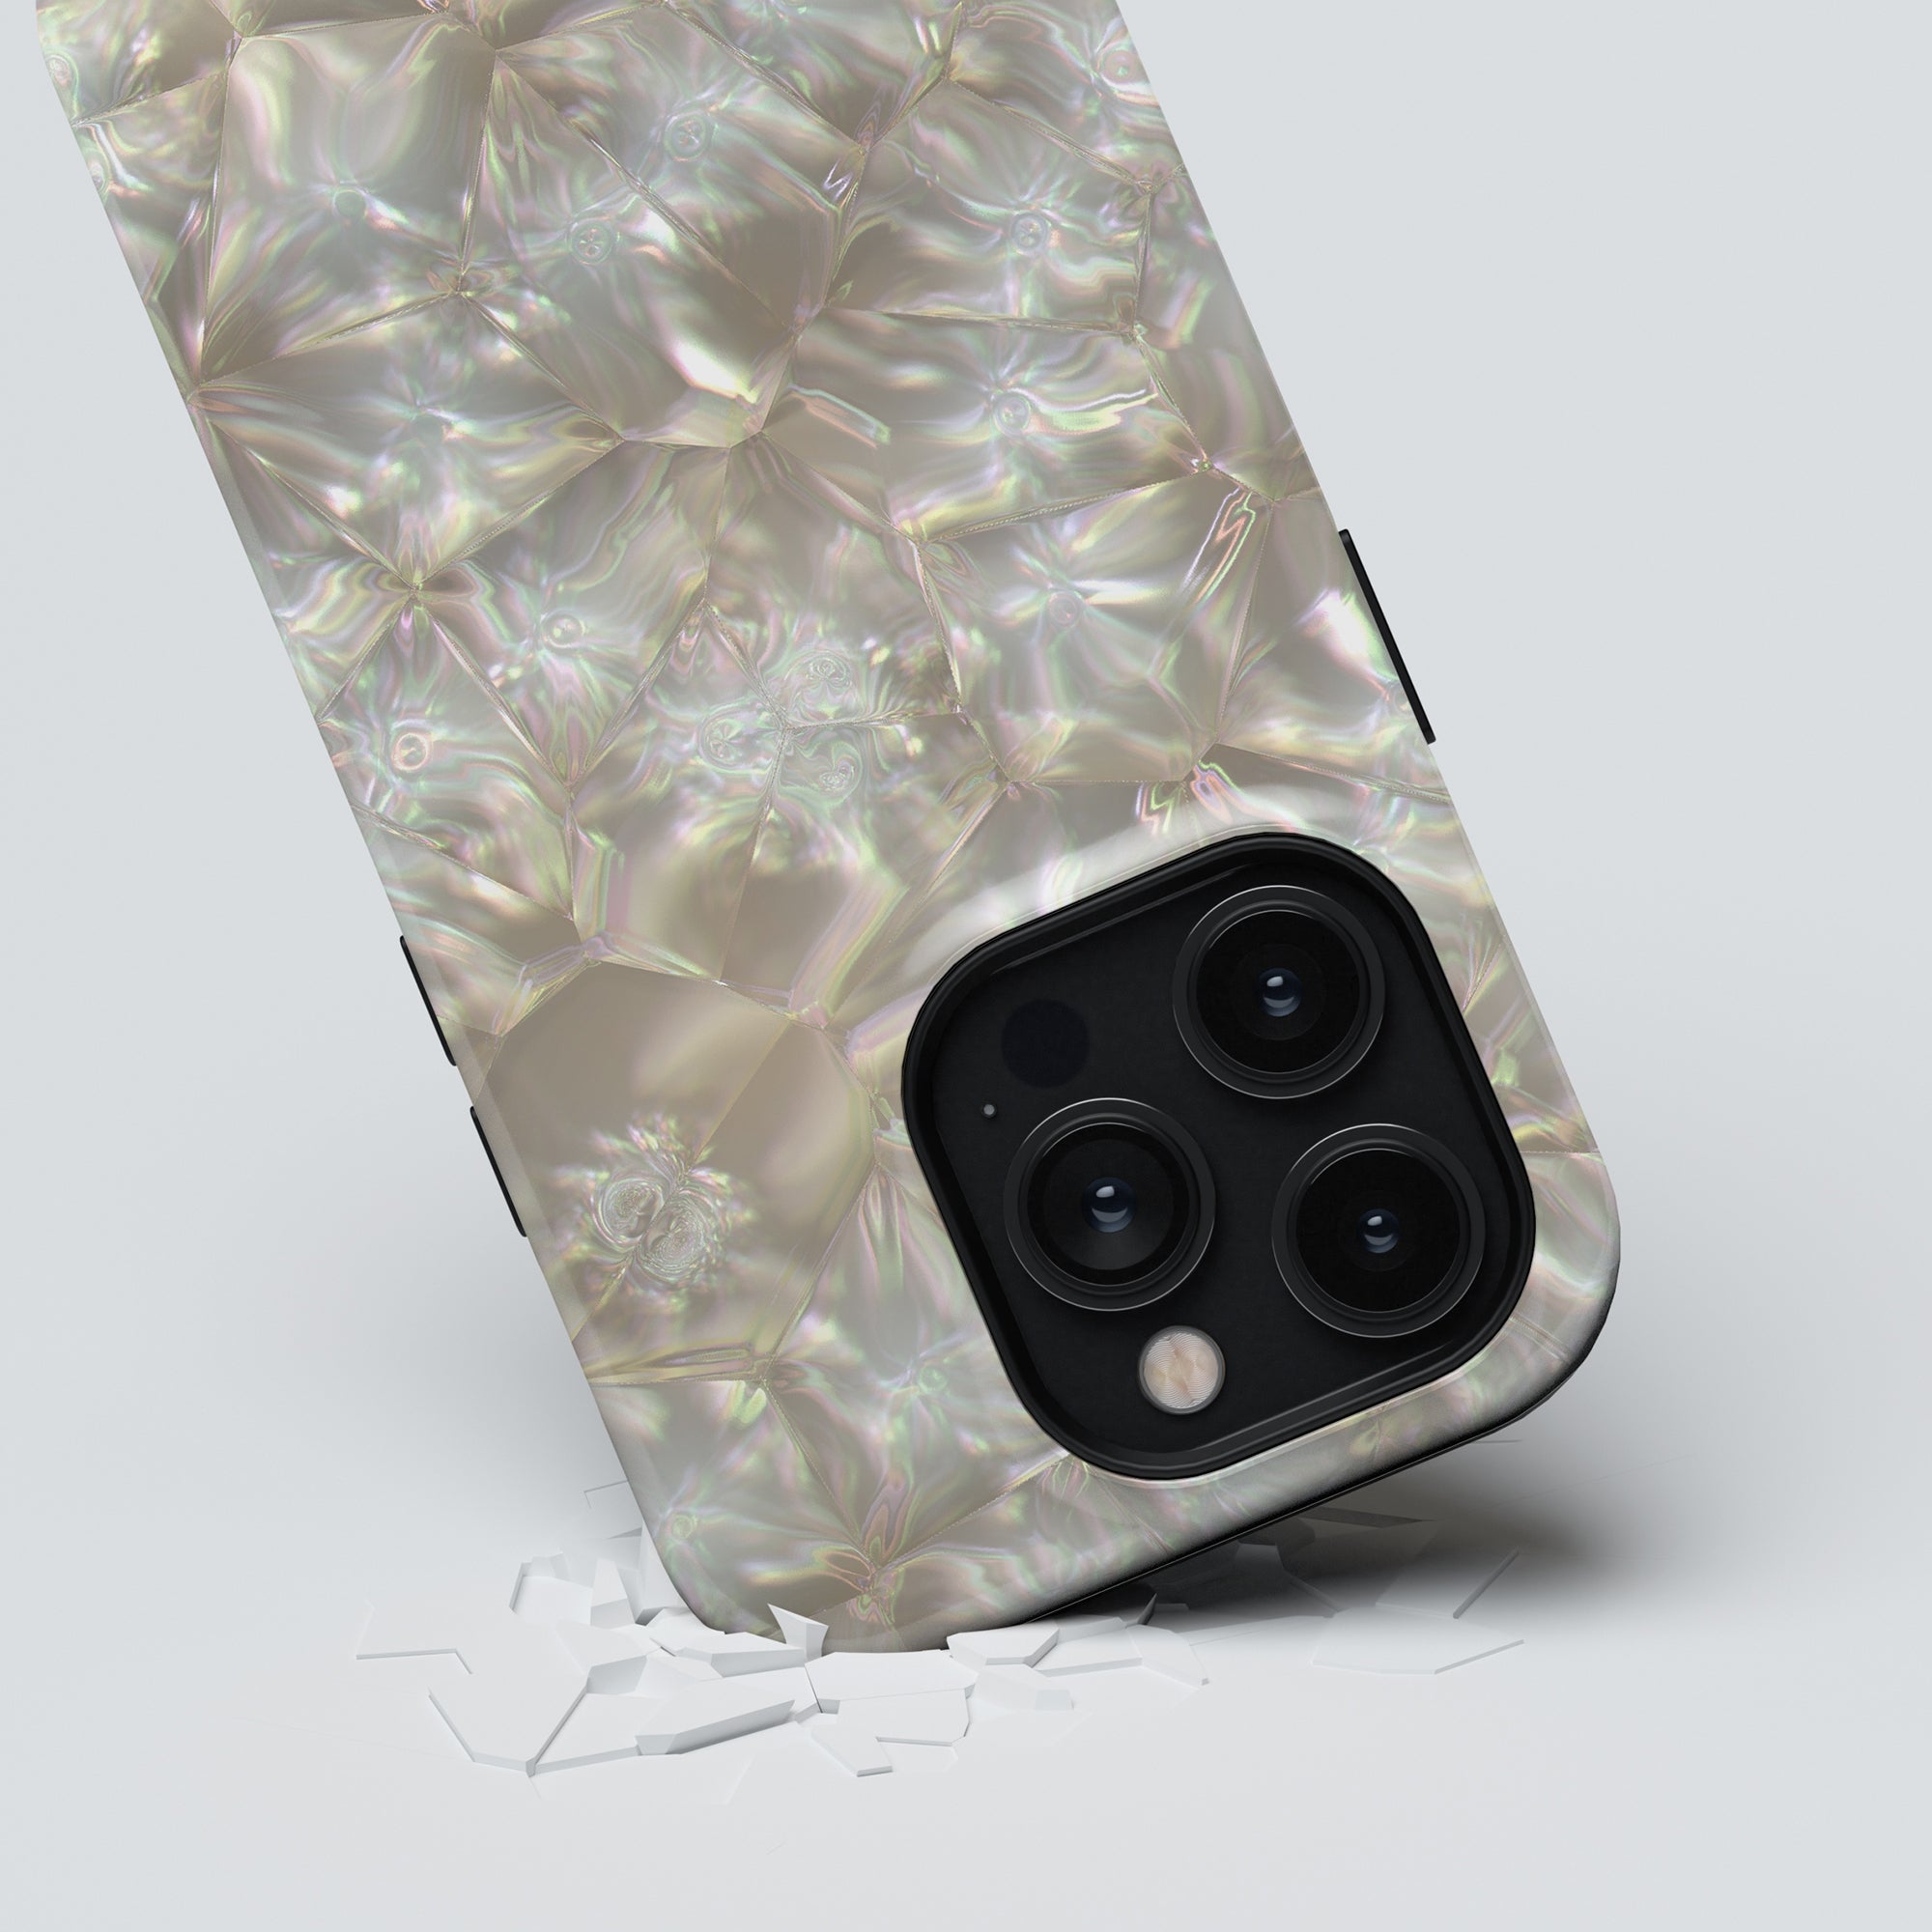 A smartphone with a reflective, textured Pearls - Tough Case and a triple-lens camera, lying on a surface with glass shards scattered near it.